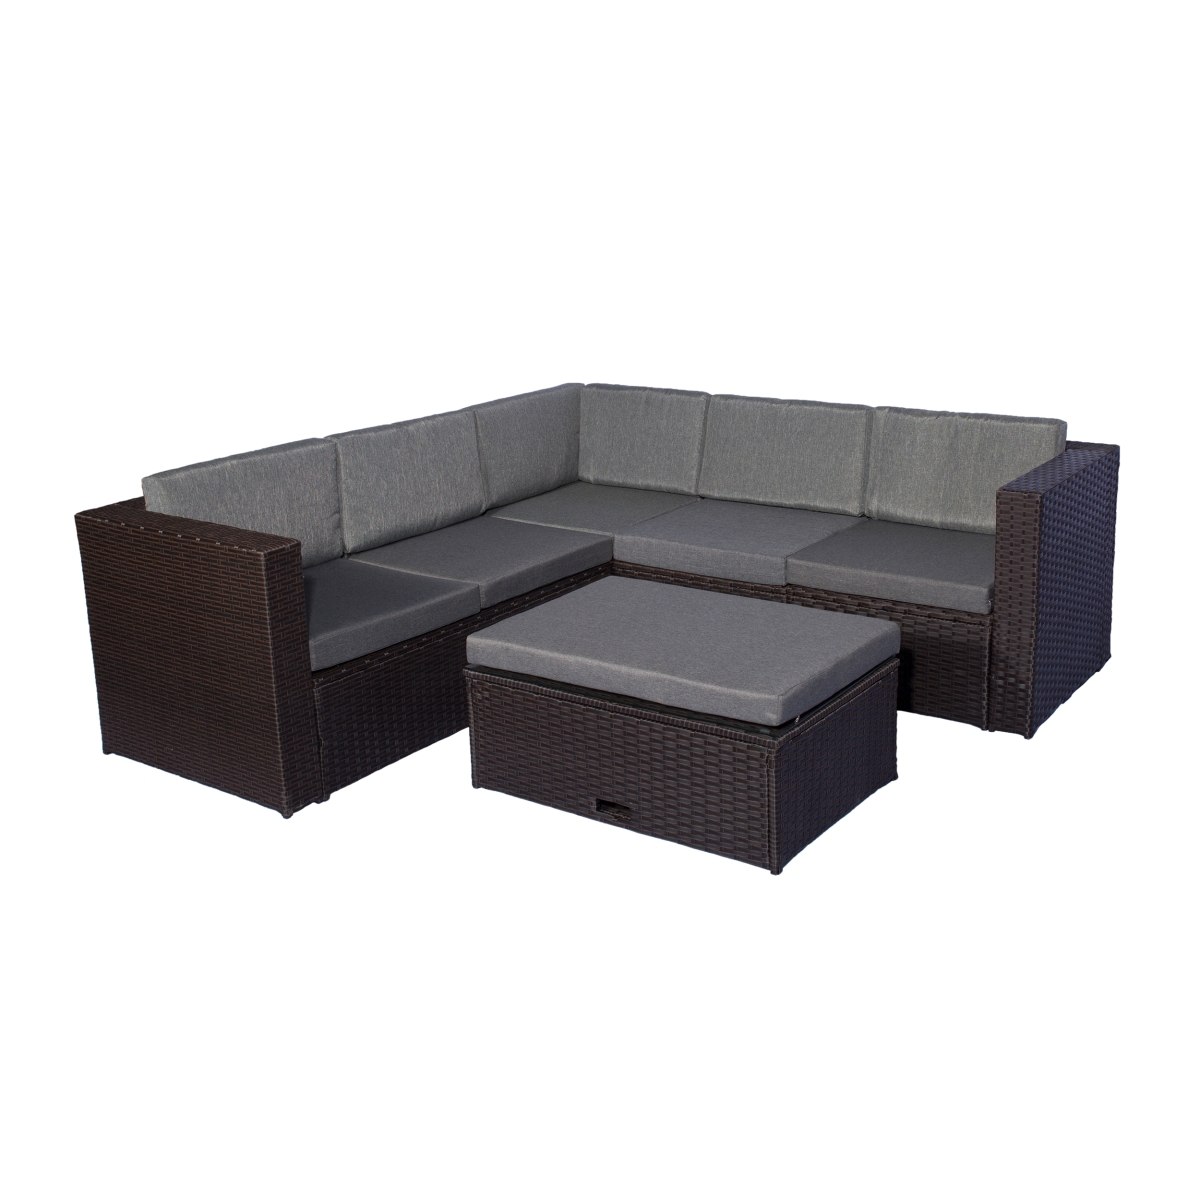 P152-02 6 Seating Modern Sectional Set With Storage Ottoman, Brown & Gray - 4 Piece